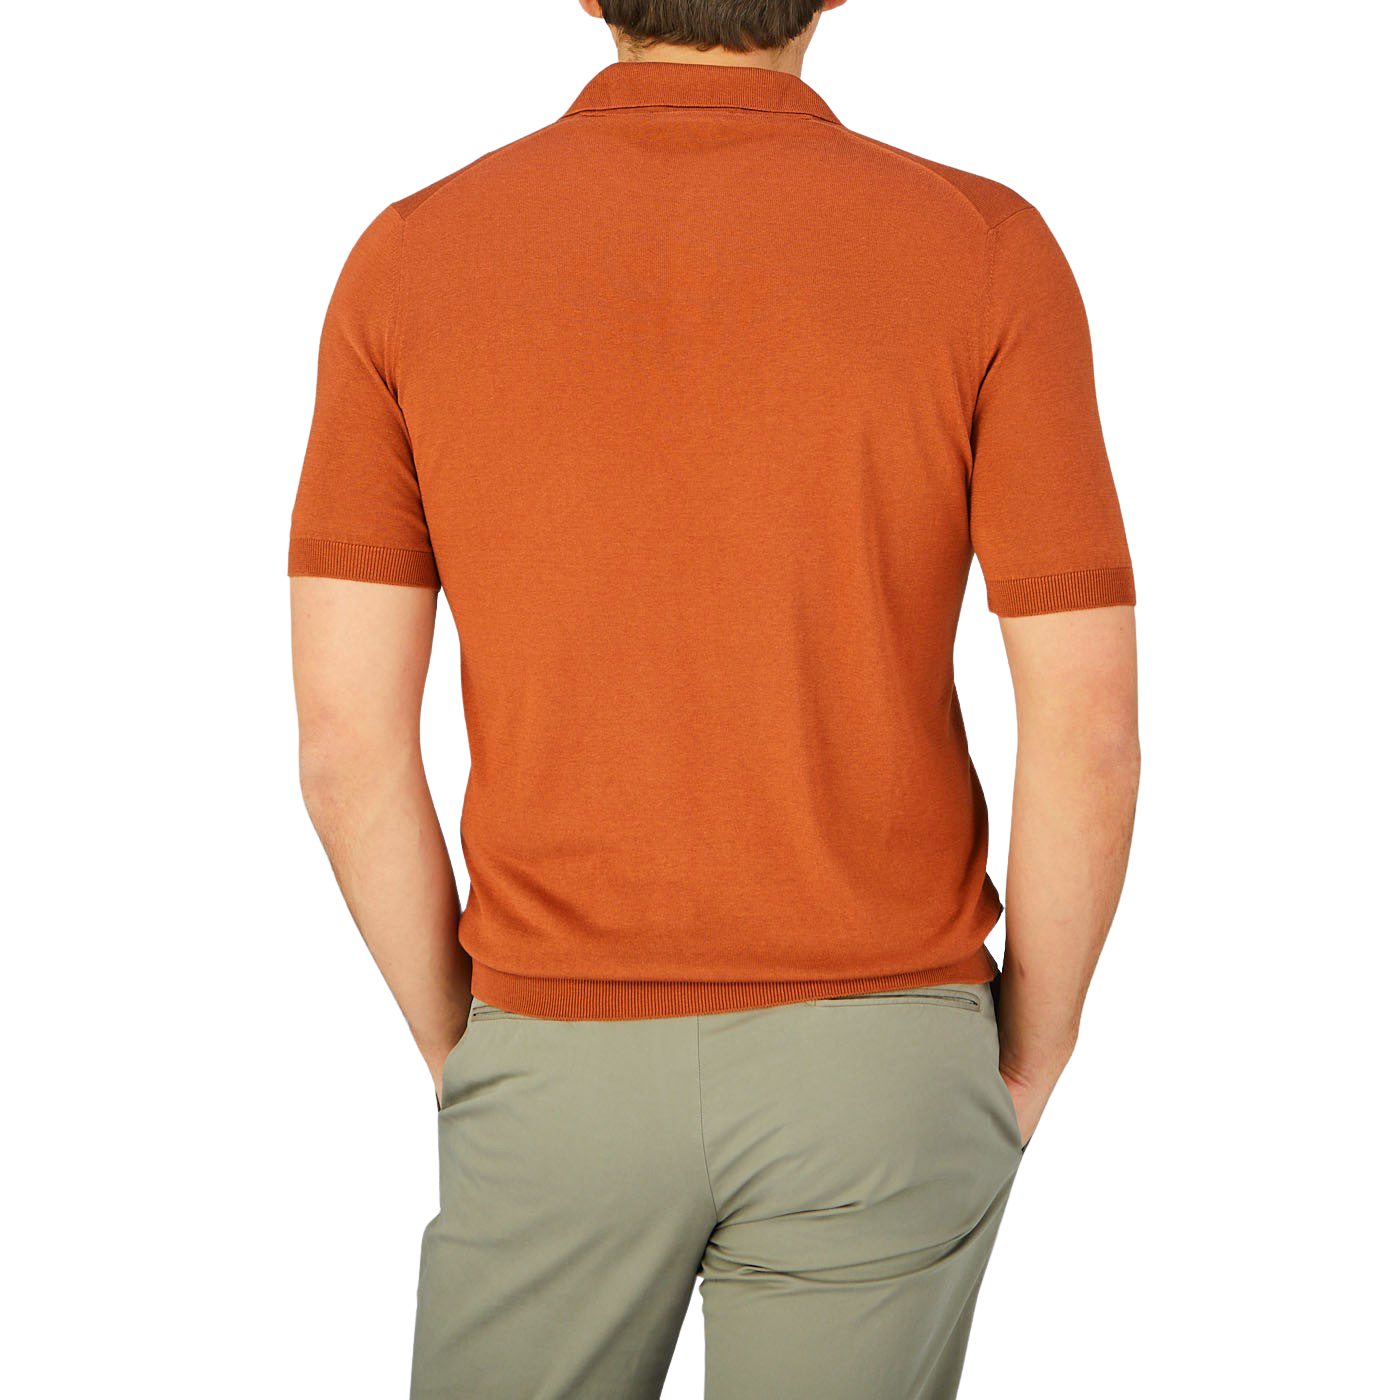 The back view of a man wearing a Gran Sasso Rust Orange Knitted Silk Polo Shirt.